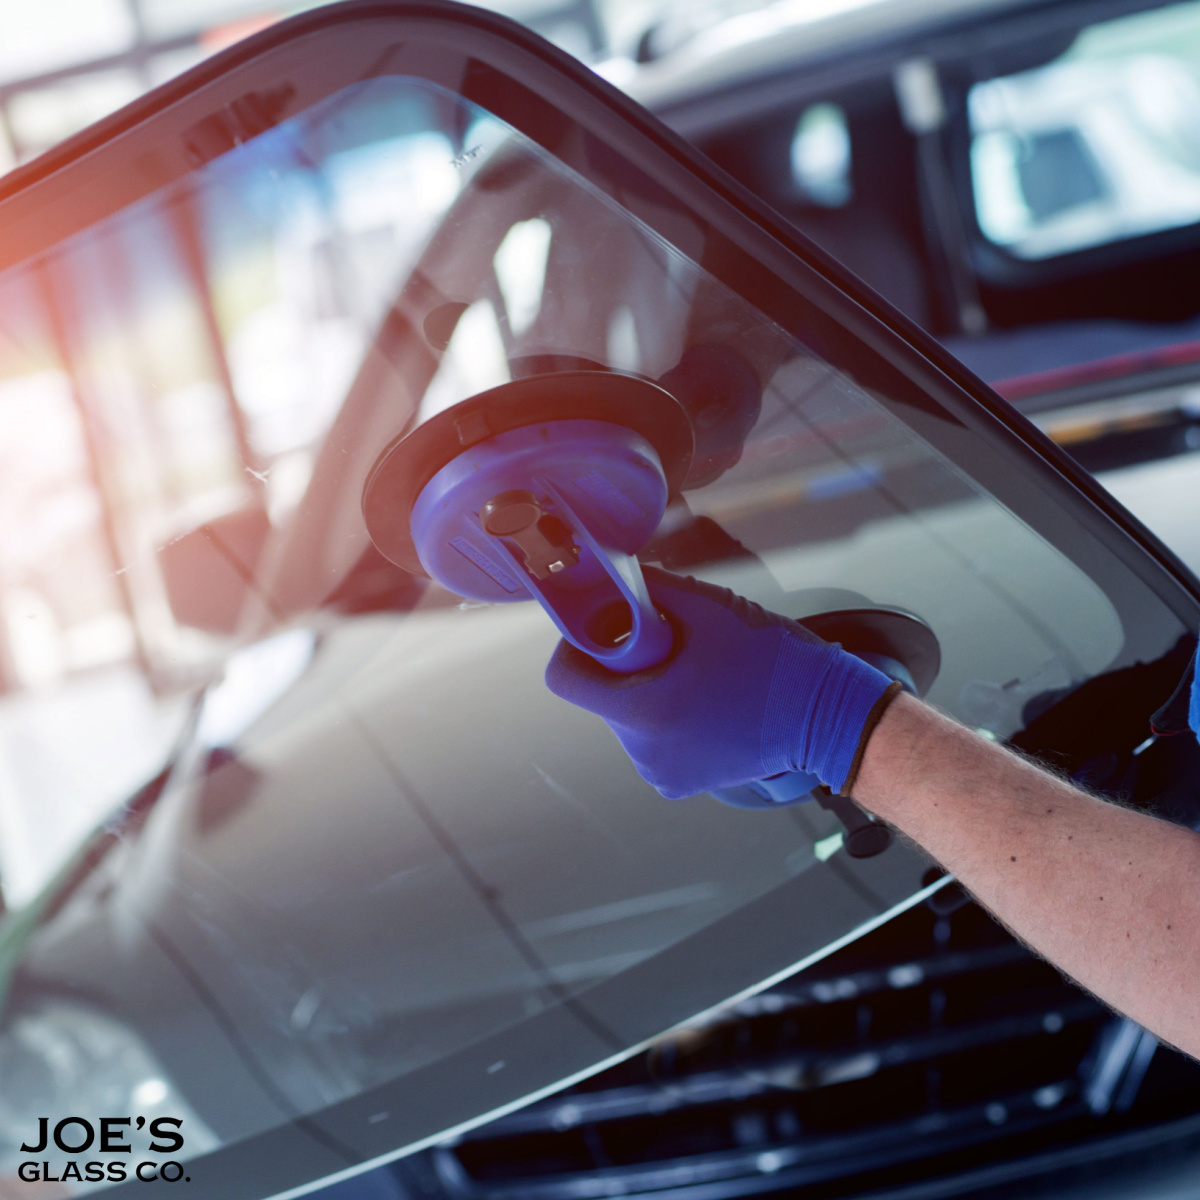 Where Auto Glass Replacement Factors into Your Everyday Afternoon